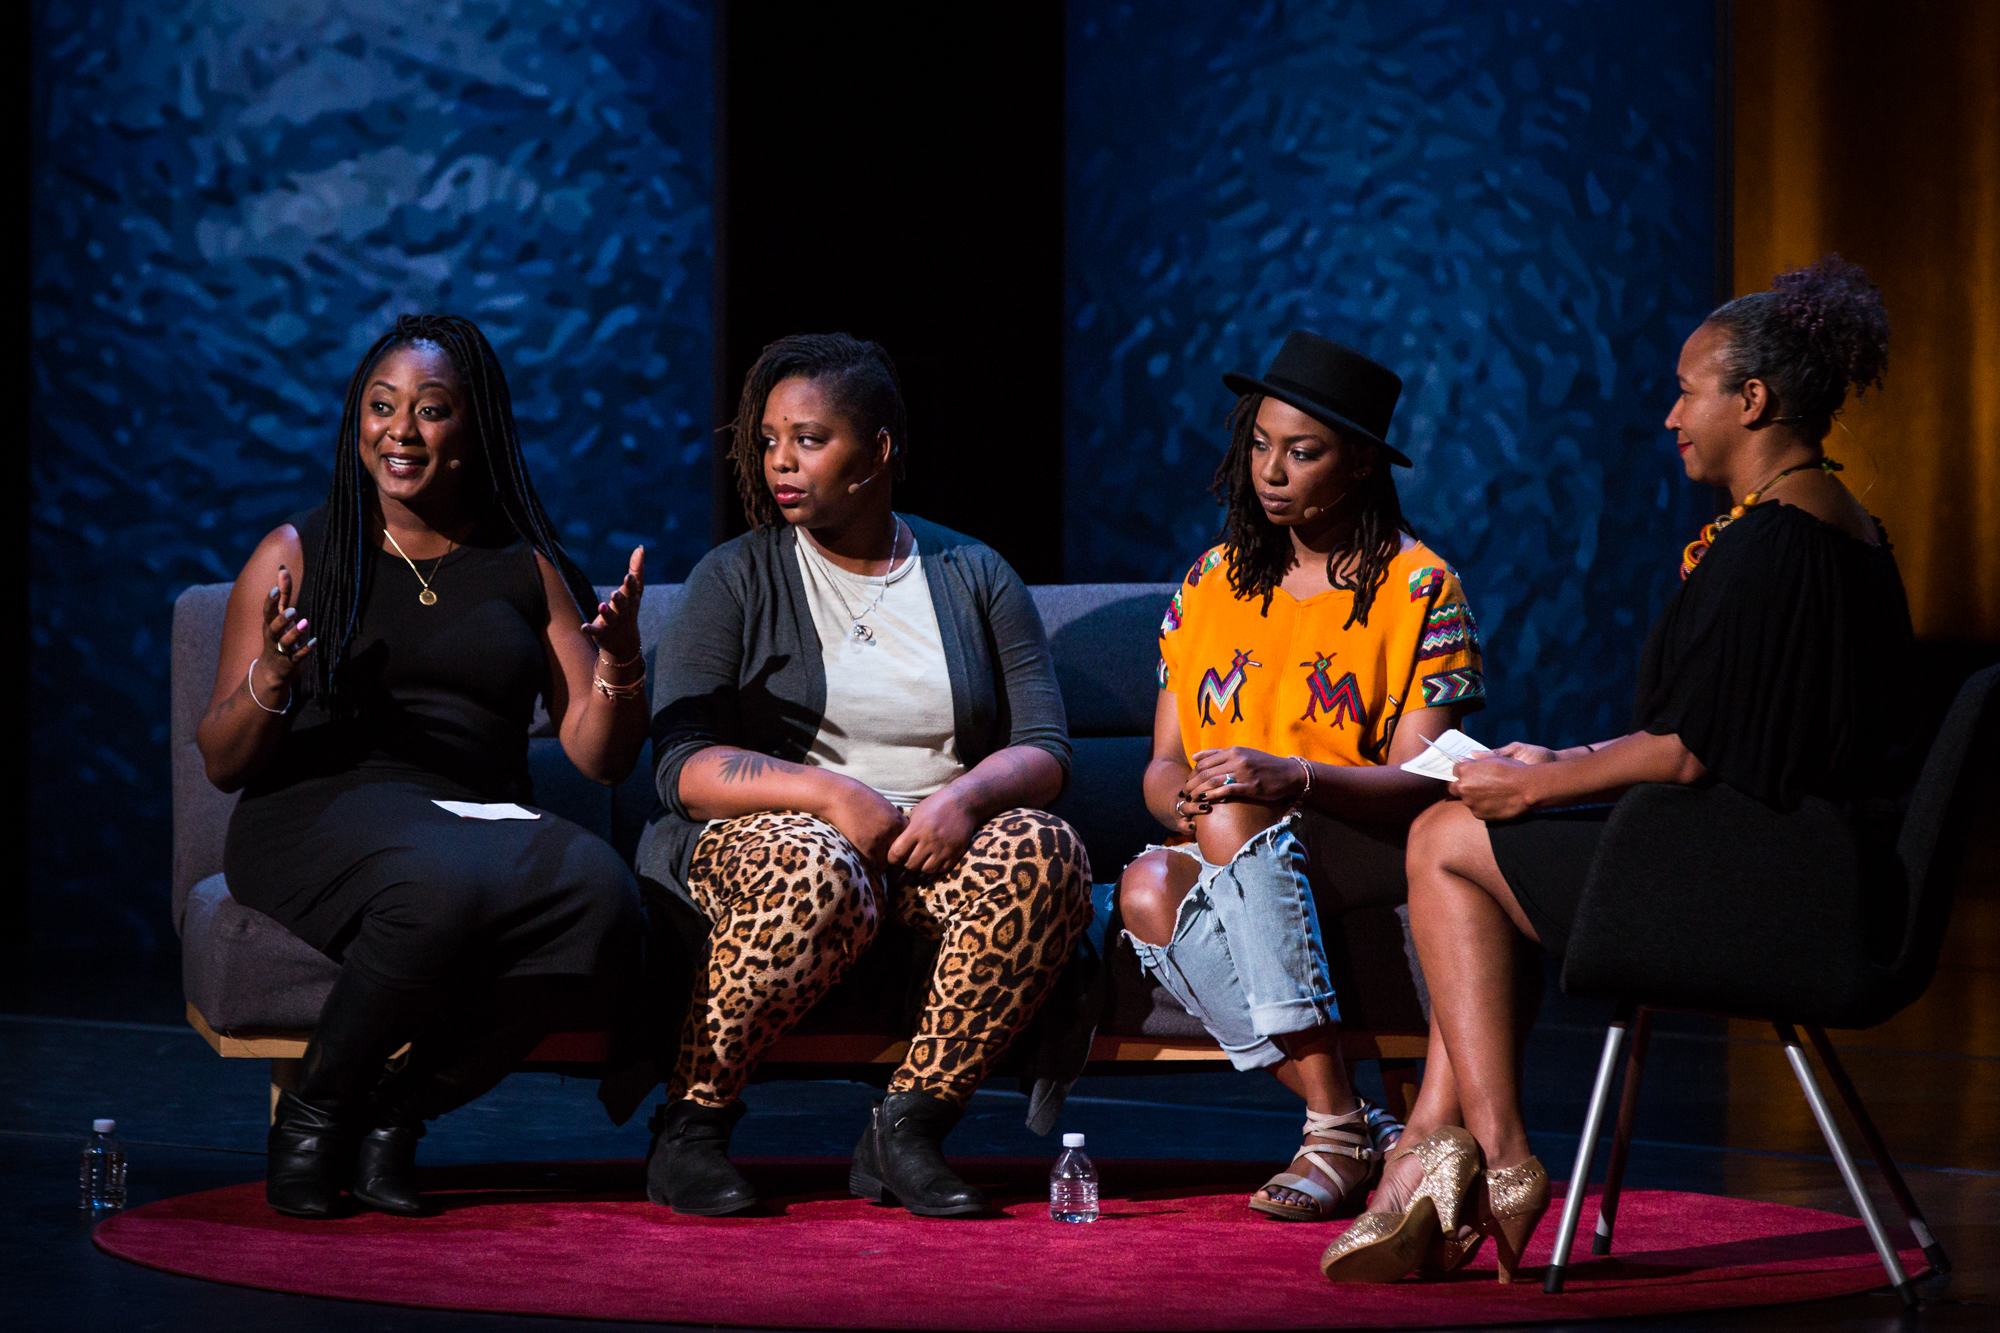 Founders of the Black Lives Matter movement (Alicia Garza, Patrisse Cullors, and Opal Tometi) interviewed by Mia Birdsong at TEDWomen 2016 - It&#039;s About Time, October 26-28, 2016, Yerba Buena Centre for the Arts, San Francisco, California. Photo: Marla Aufmuth / TED